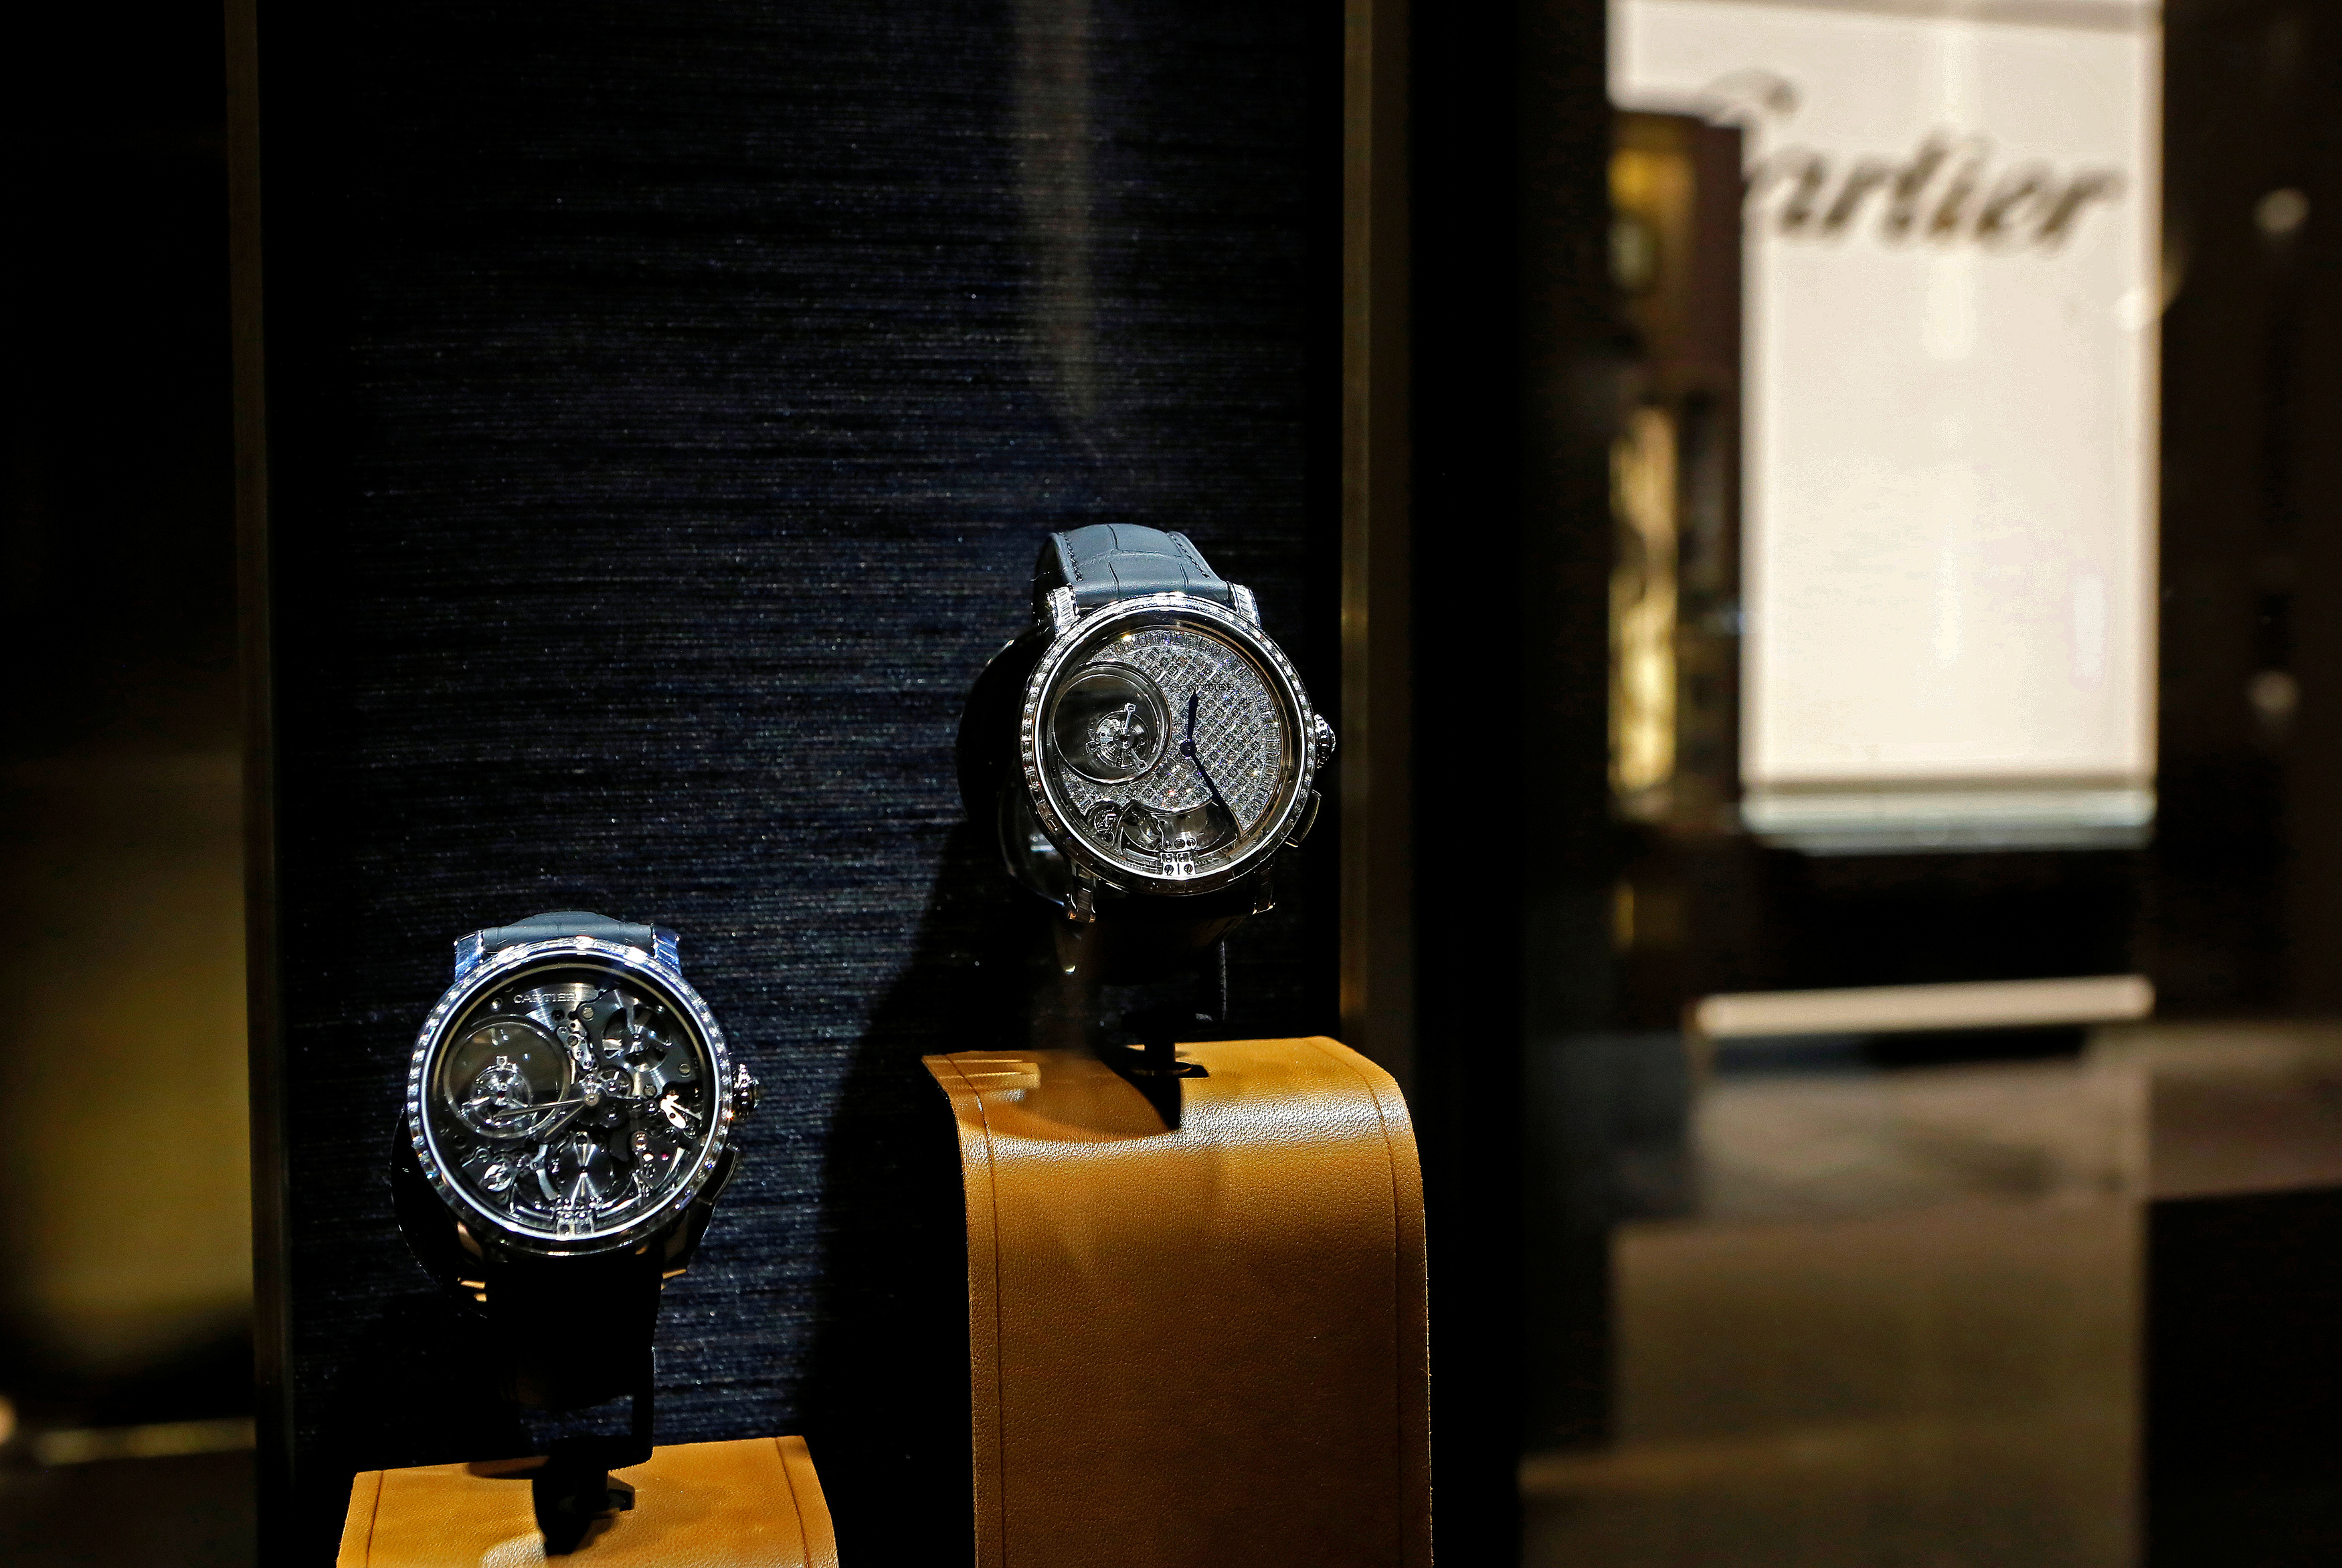 Richemont's perfect match has luxury price tag